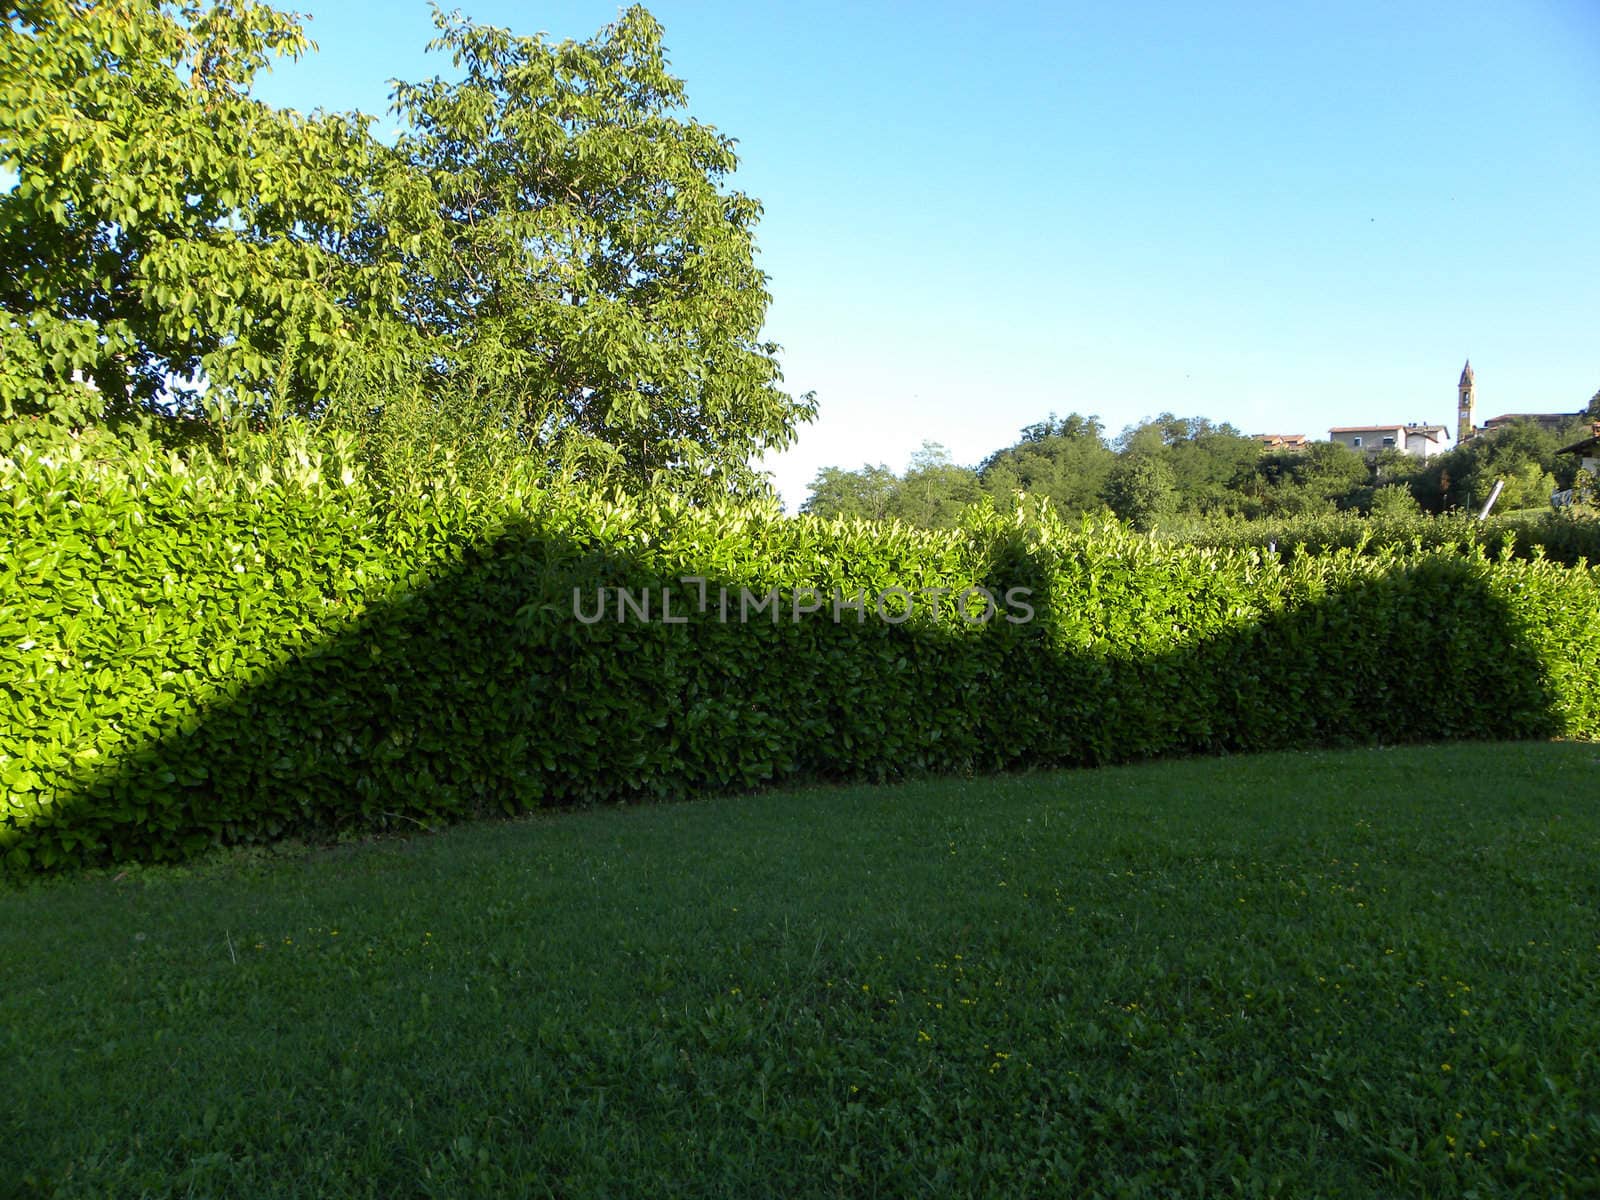                           	 Shadow over a hedge in the shape of a bat 